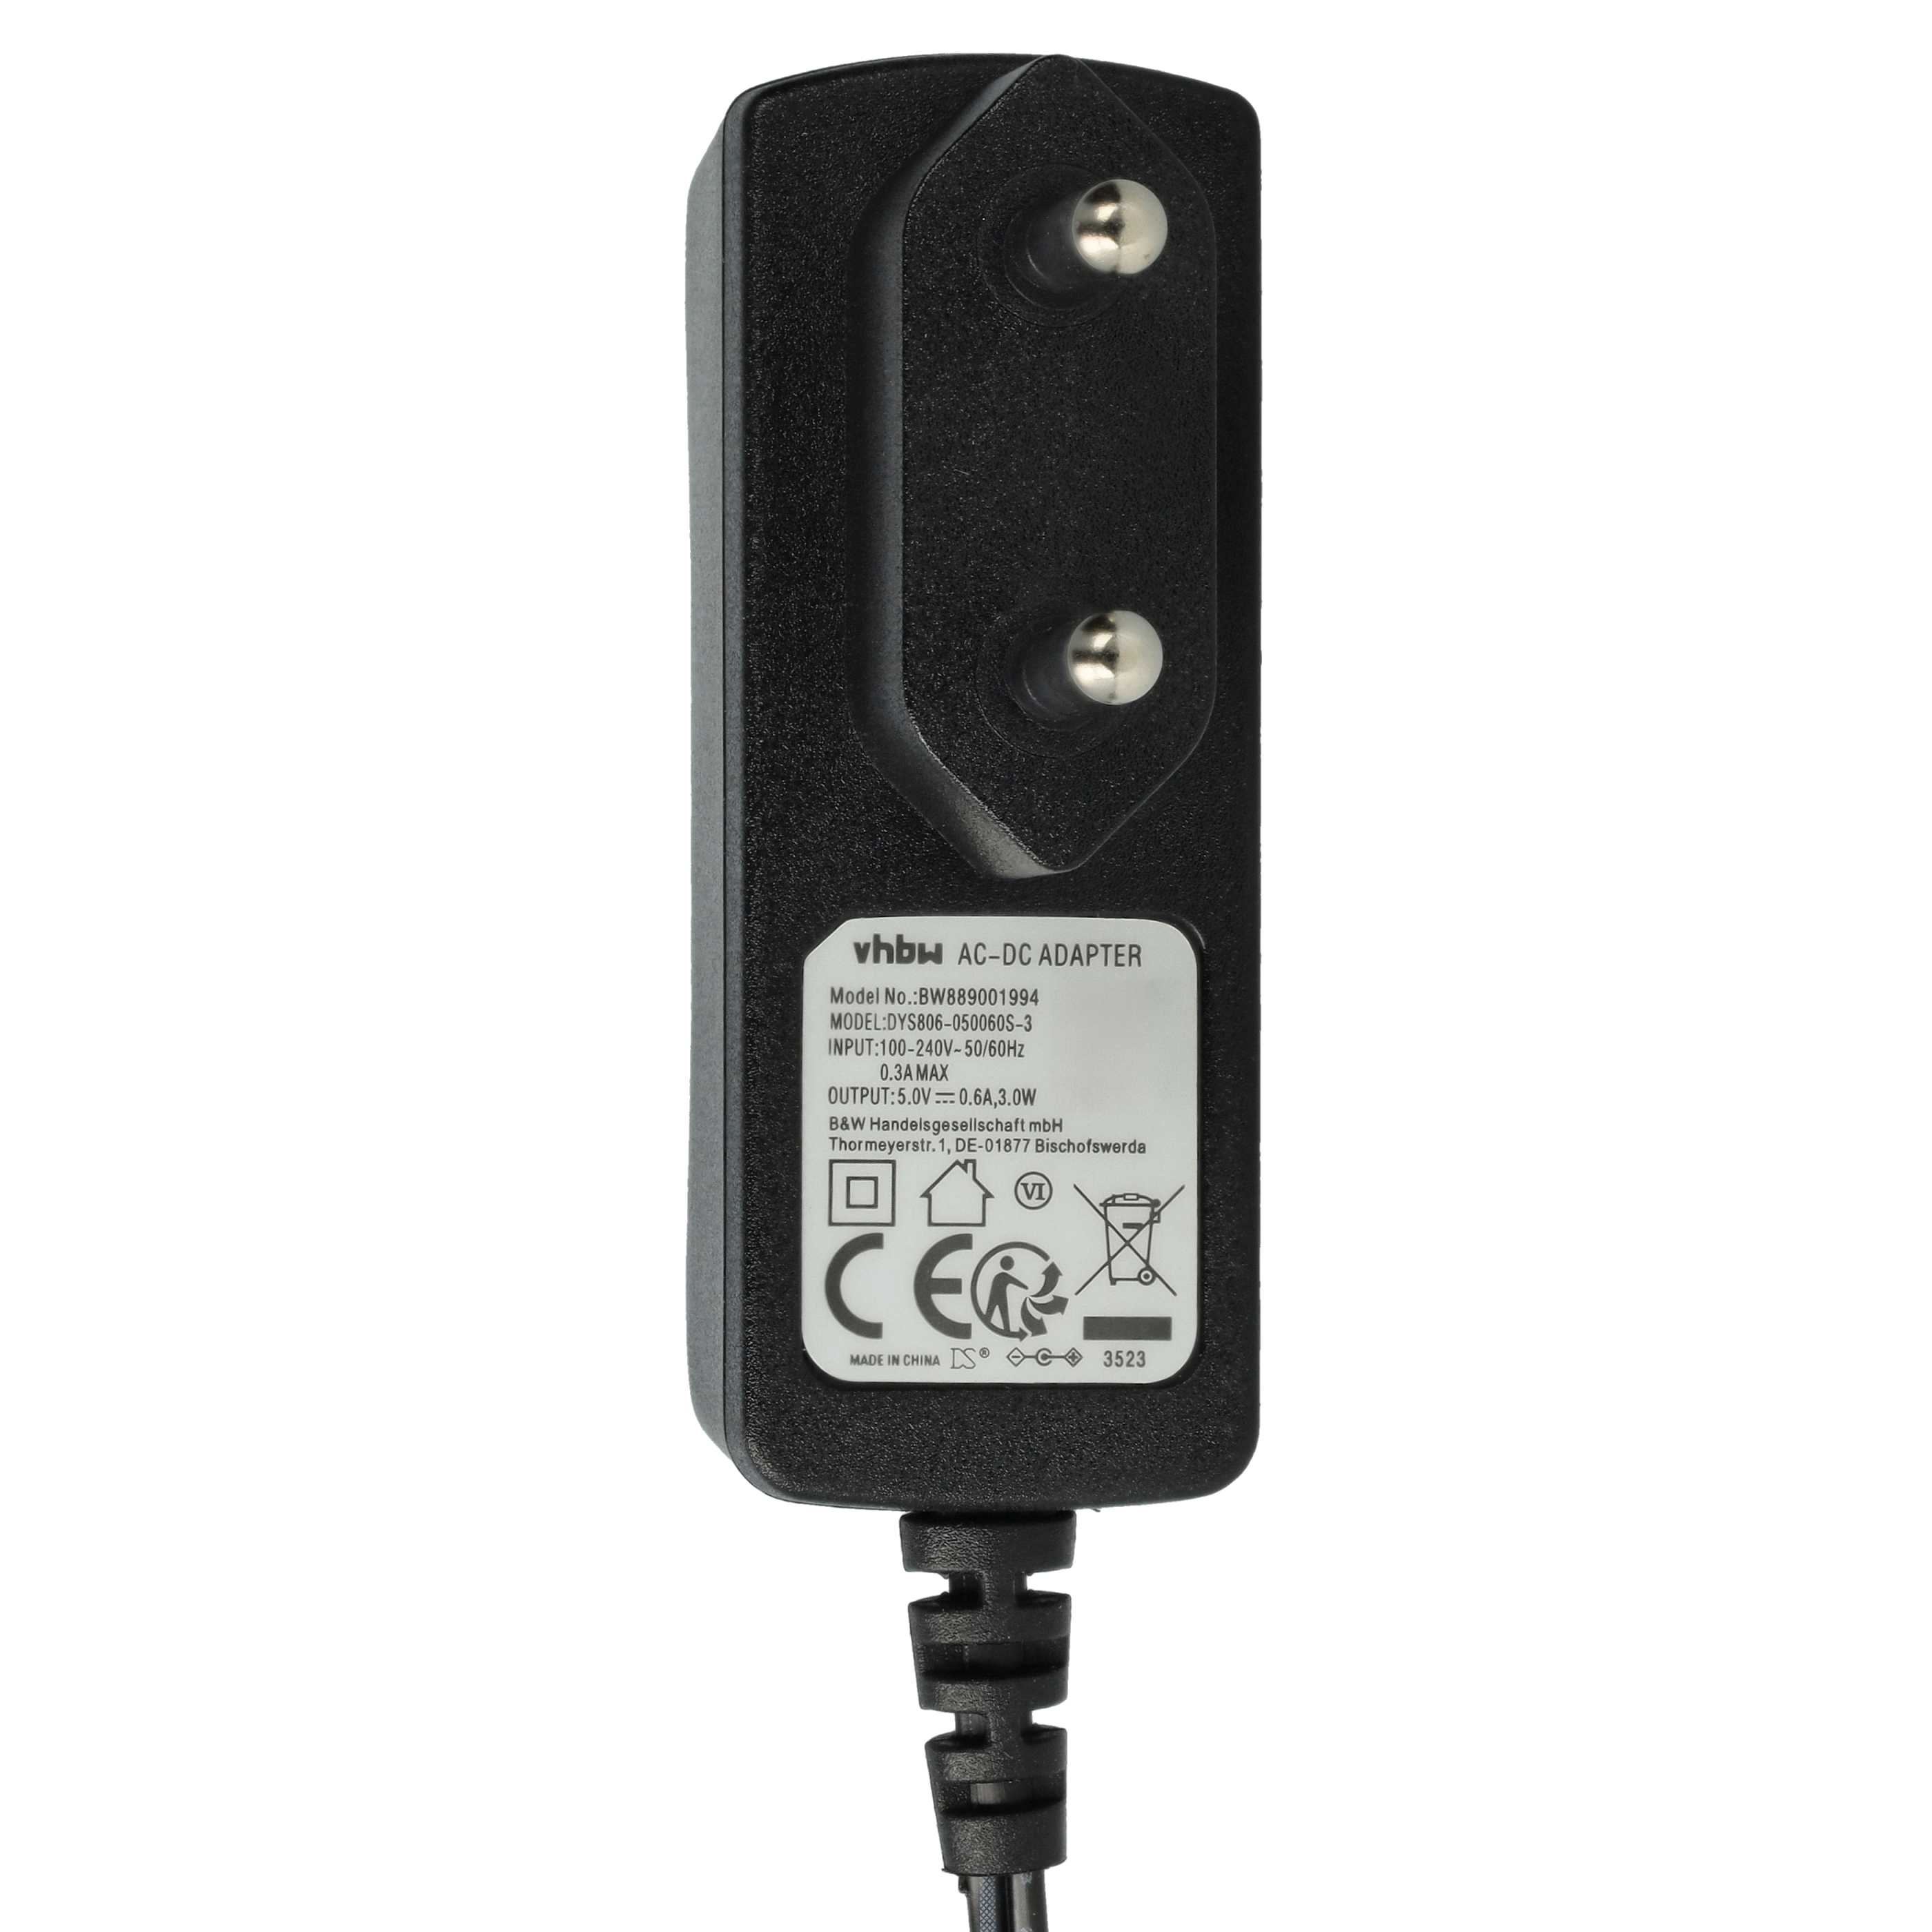 Mains Power Adapter replaces Fanvil PSU-506 for Yealink Landline Telephone, Home Telephone etc.